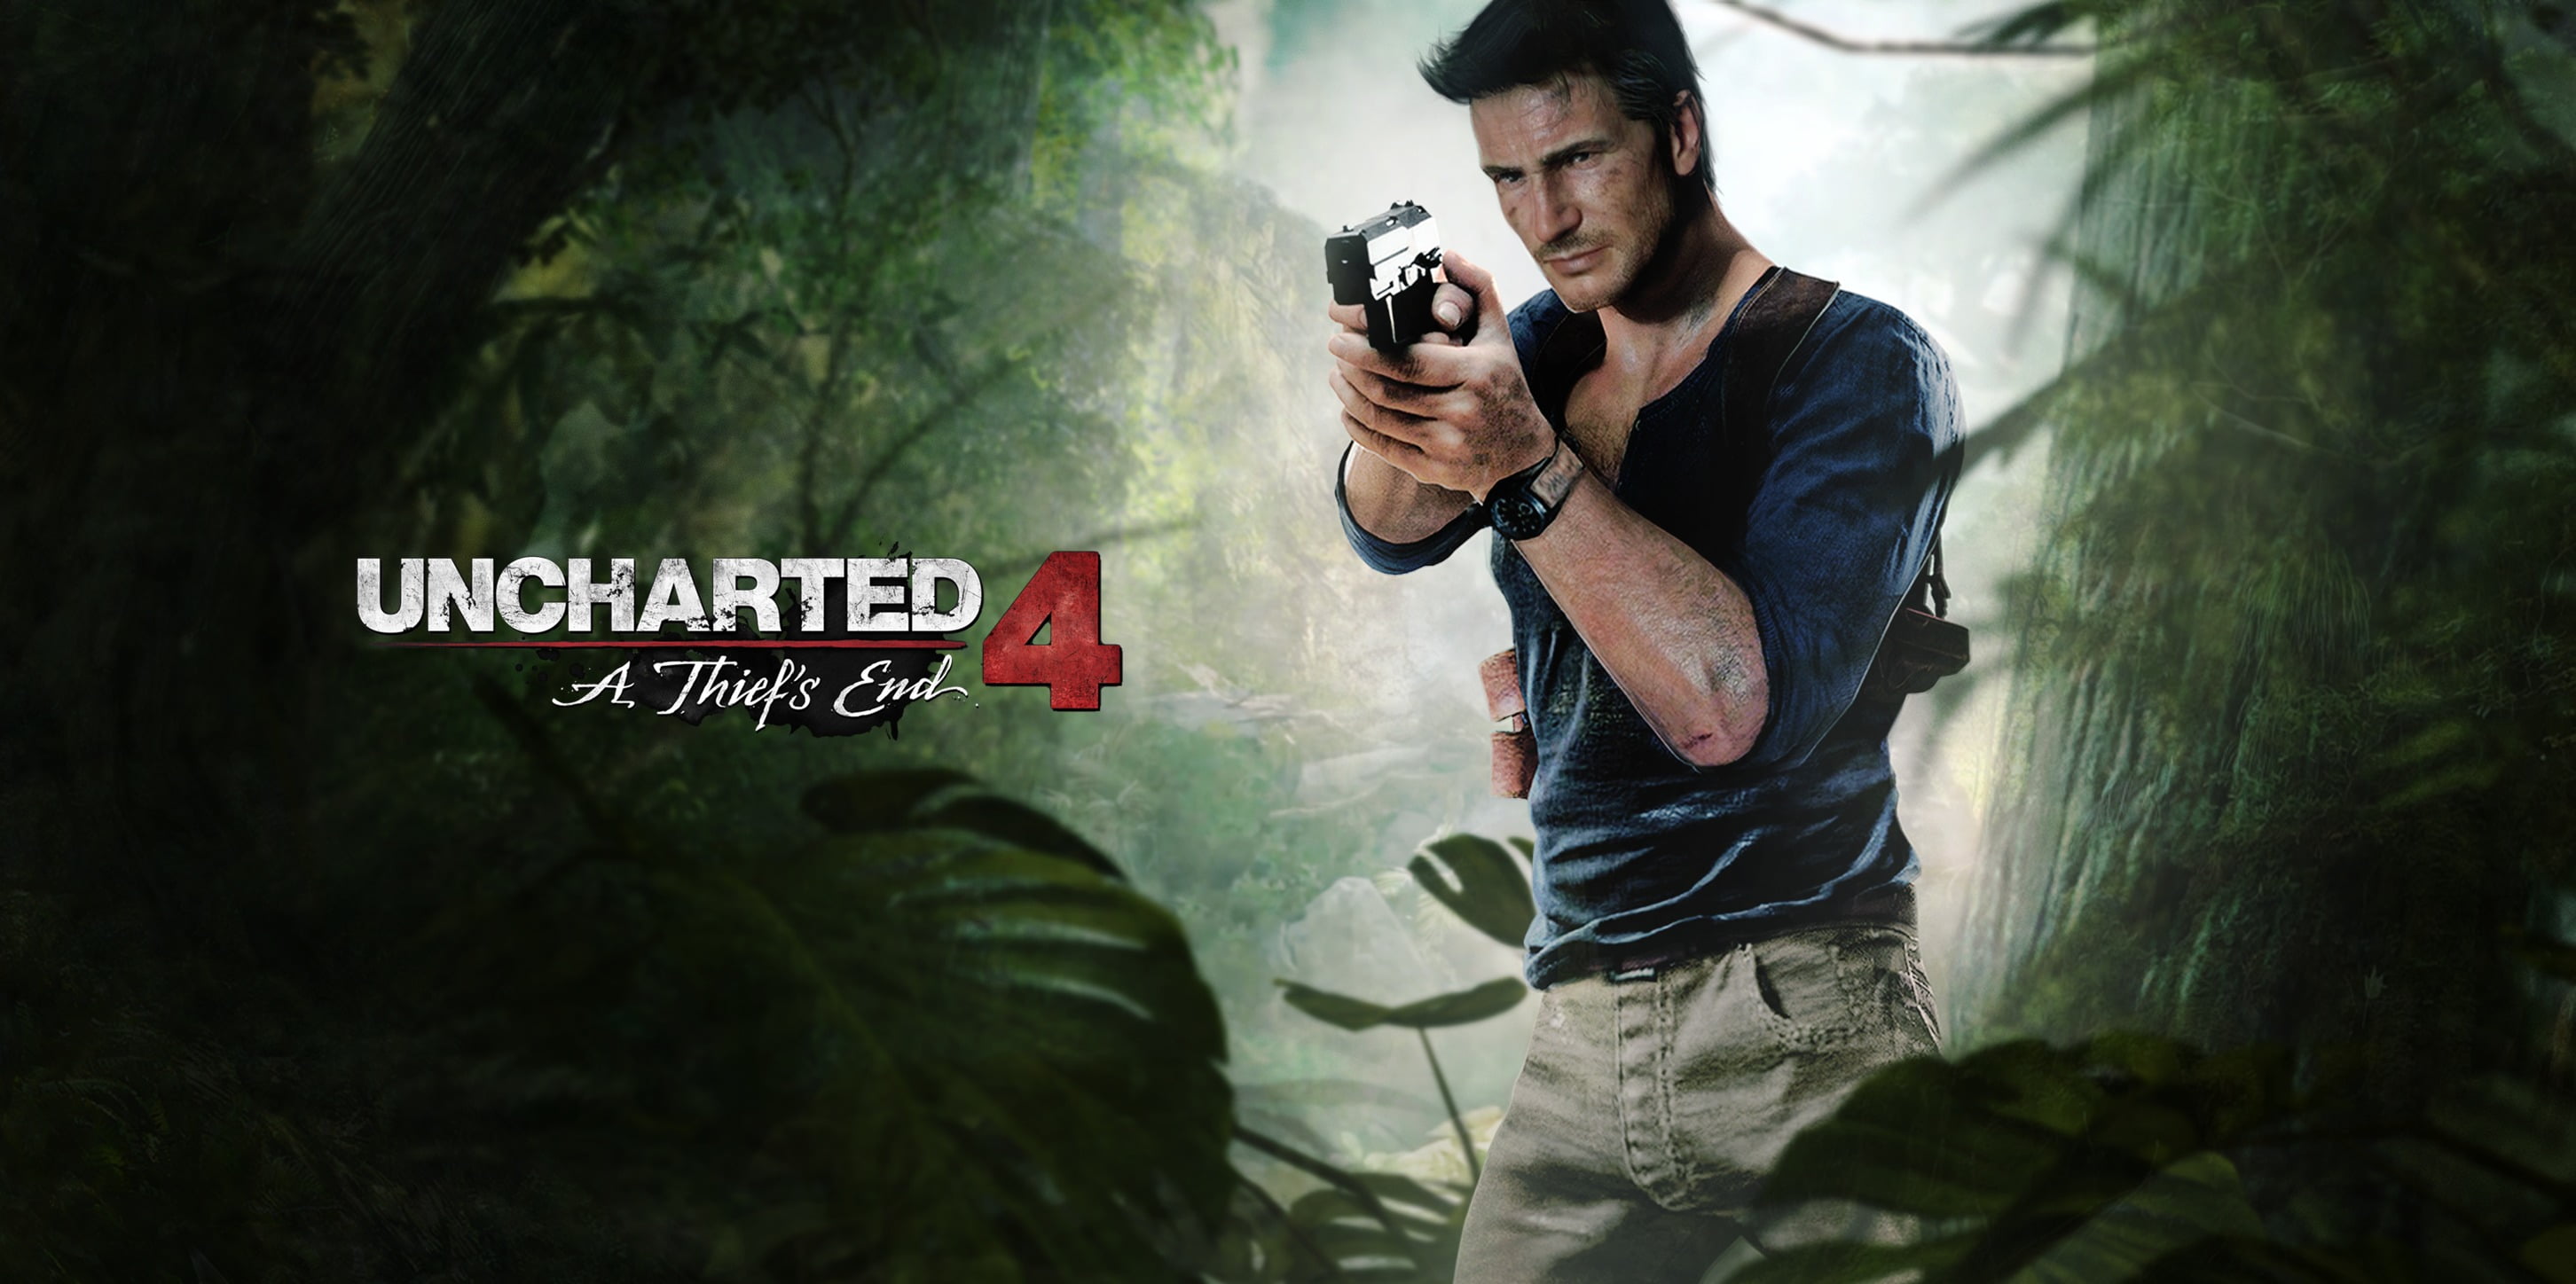 uncharted 4 posters